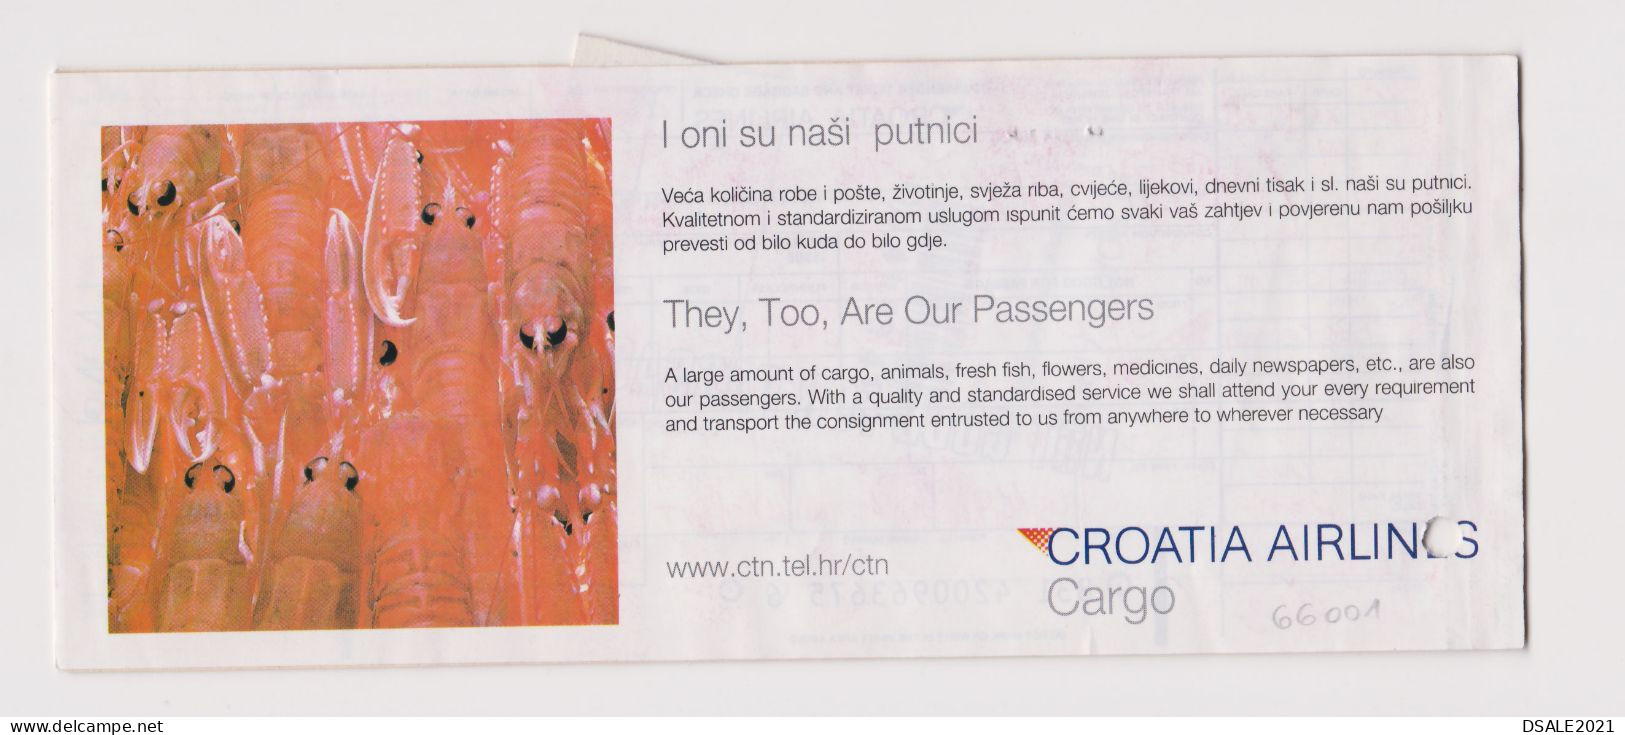 CROATIA AIRLINES, Croatian Airline Carrier Passenger Ticket And Baggage Check Used (66001) - Tickets